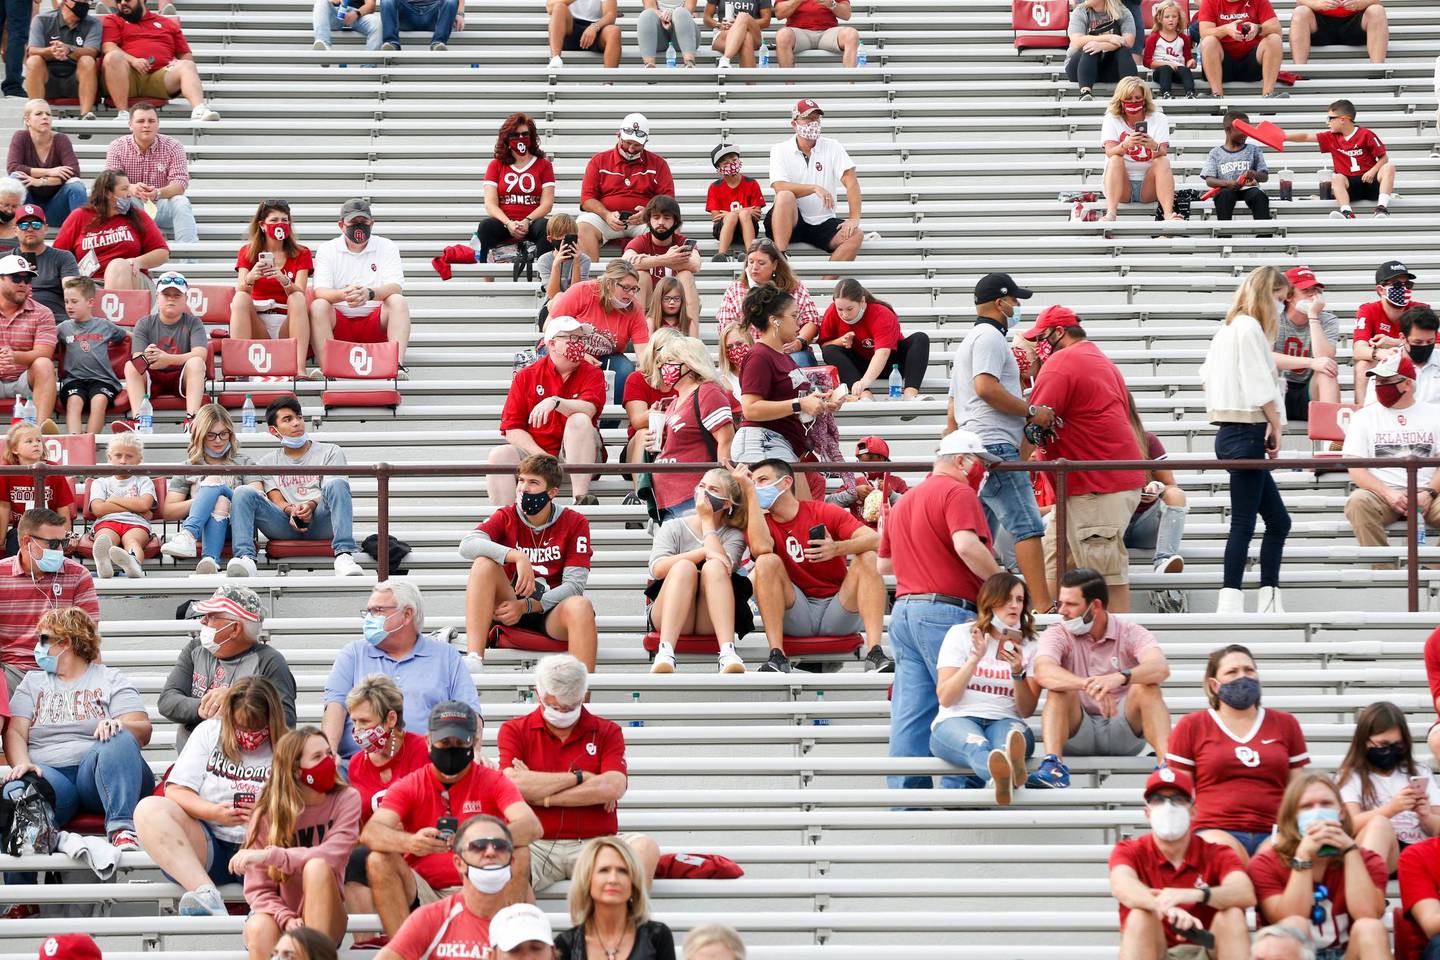 Oklahoma fans find their seats before an NCAA college football game against Missouri State in Norman, Okla., Saturday, Sept. 12, 2020. (Ian Maule/Tulsa World via AP)